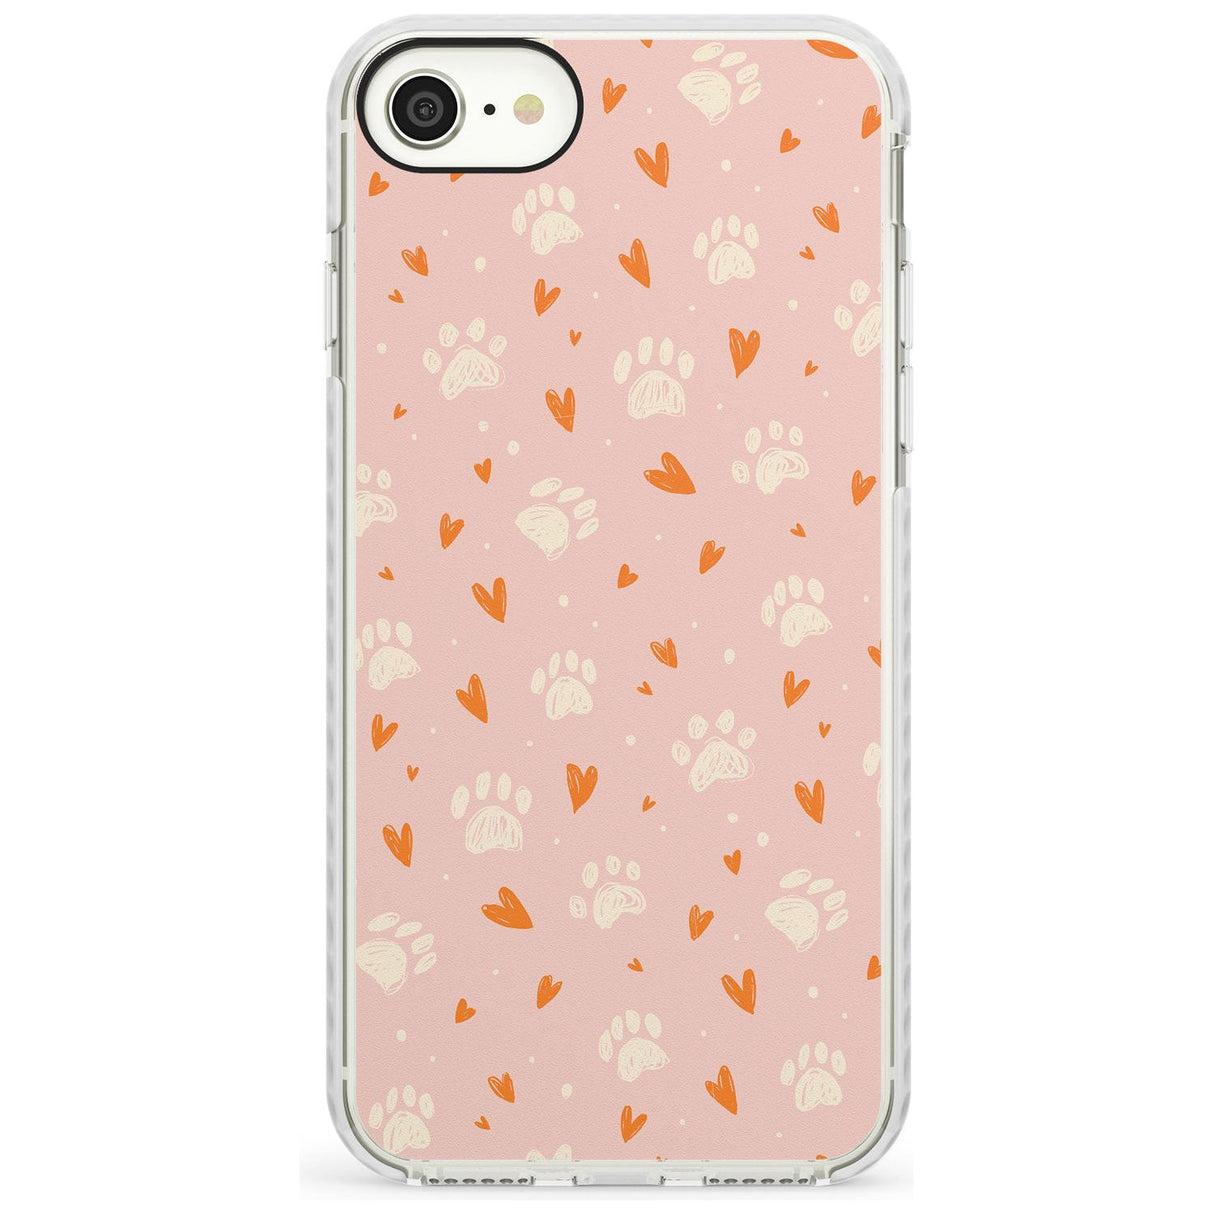 Paws & Hearts Pattern Slim TPU Phone Case for iPhone SE 8 7 Plus